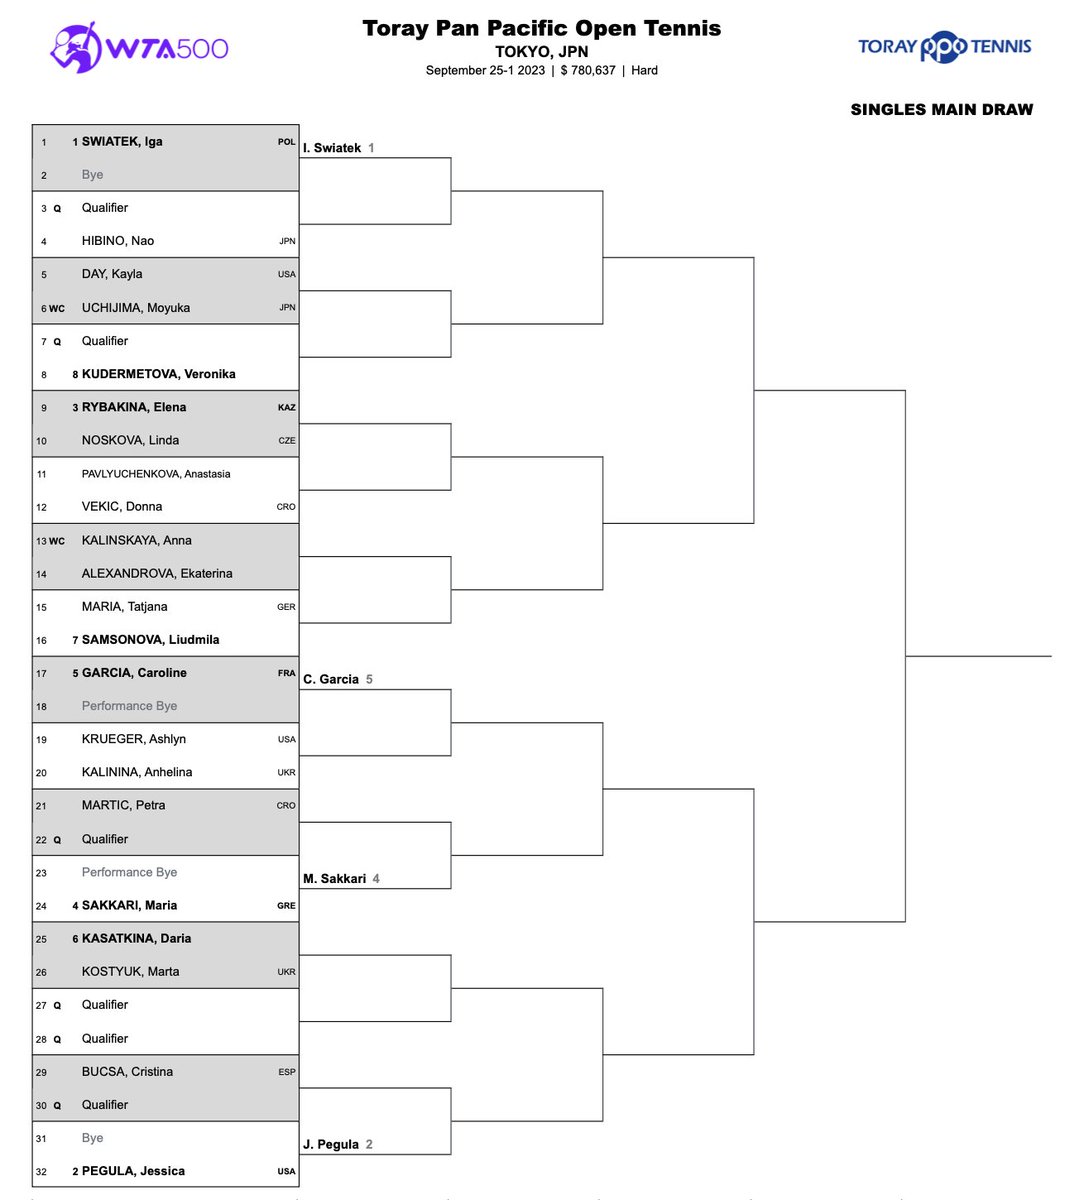 Main draw in Tokyo (WTA 500), where Iga Swiatek, Jessica Pegula, Elena Rybakina and Maria Sakkari are the top seeds. Tokyo is trialing performance byes. Two were allocated to Guadalajara semifinalists Caroline Garcia and Maria Sakkari, after their seeded positions were drawn.